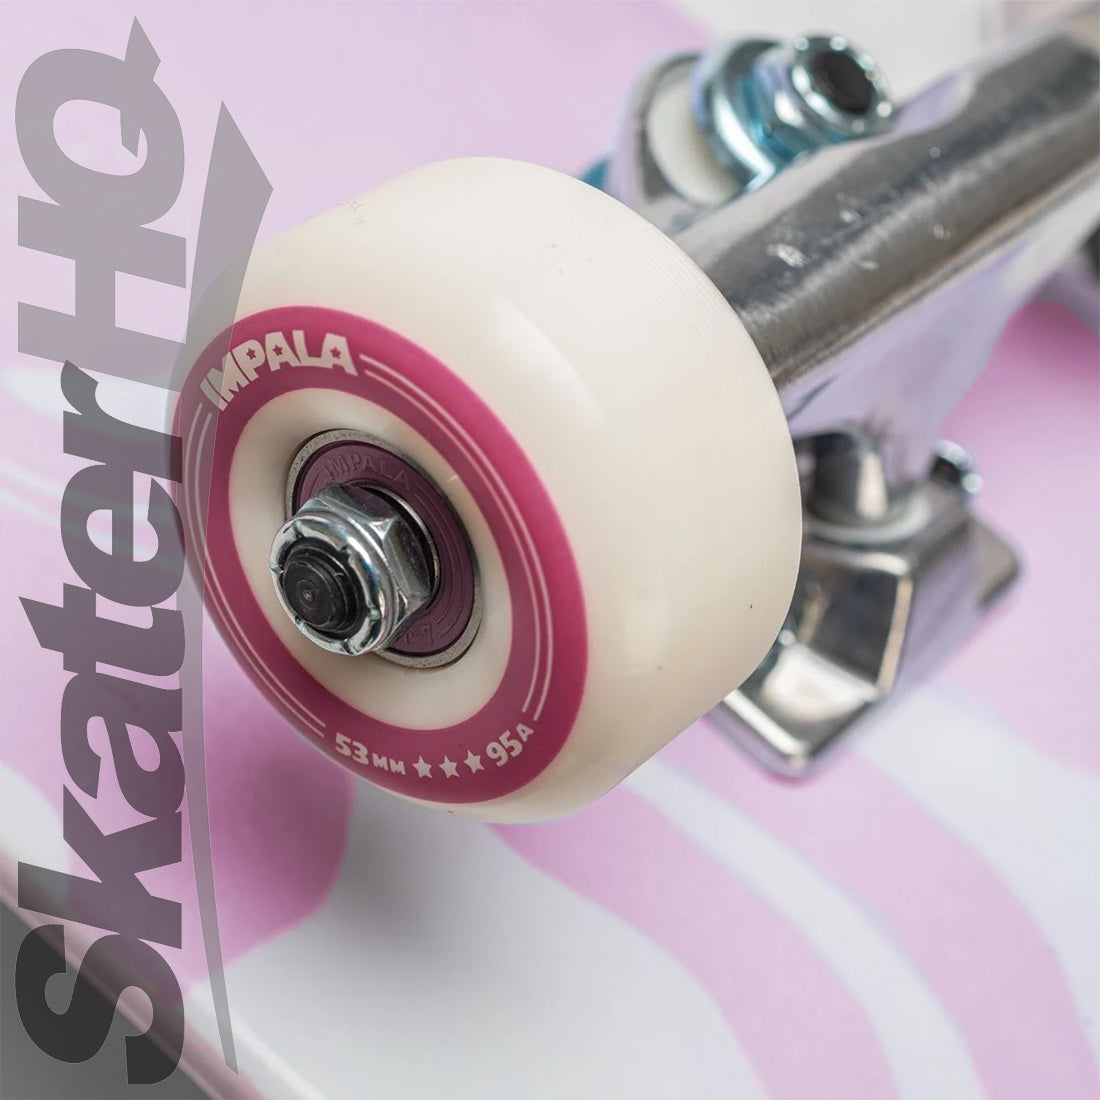 Impala Cosmos 8.25 Complete - Pink Skateboard Completes Modern Street